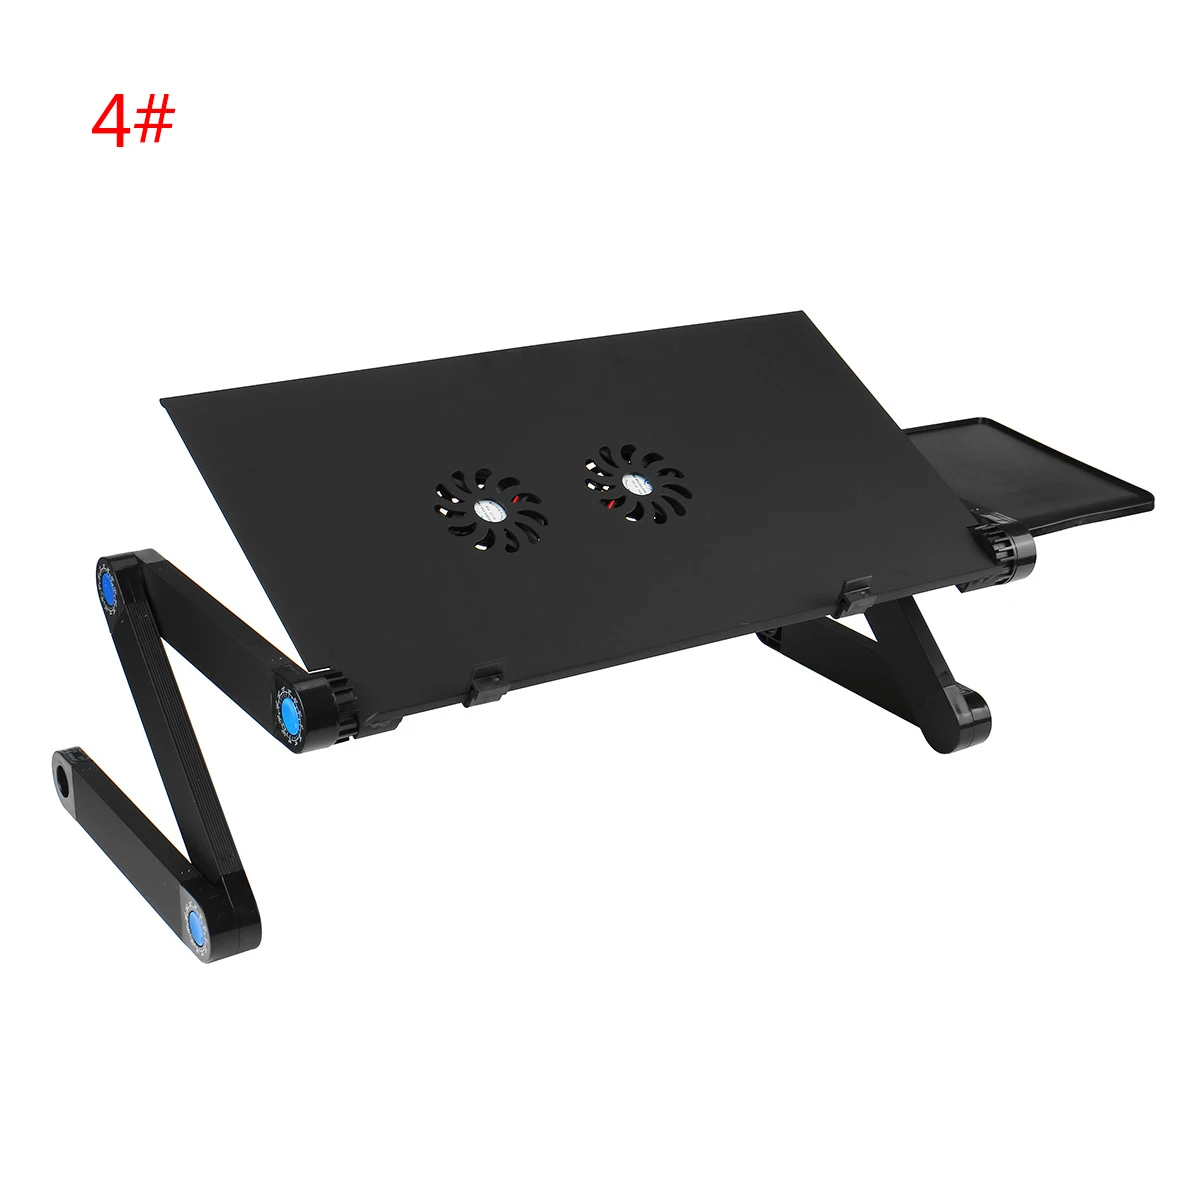 Aluminum Laptop Folding Table Computer Desk Stand for Bed 360 Degree Rotation MultiFunctional Portable Table 54*27*4.6cm 